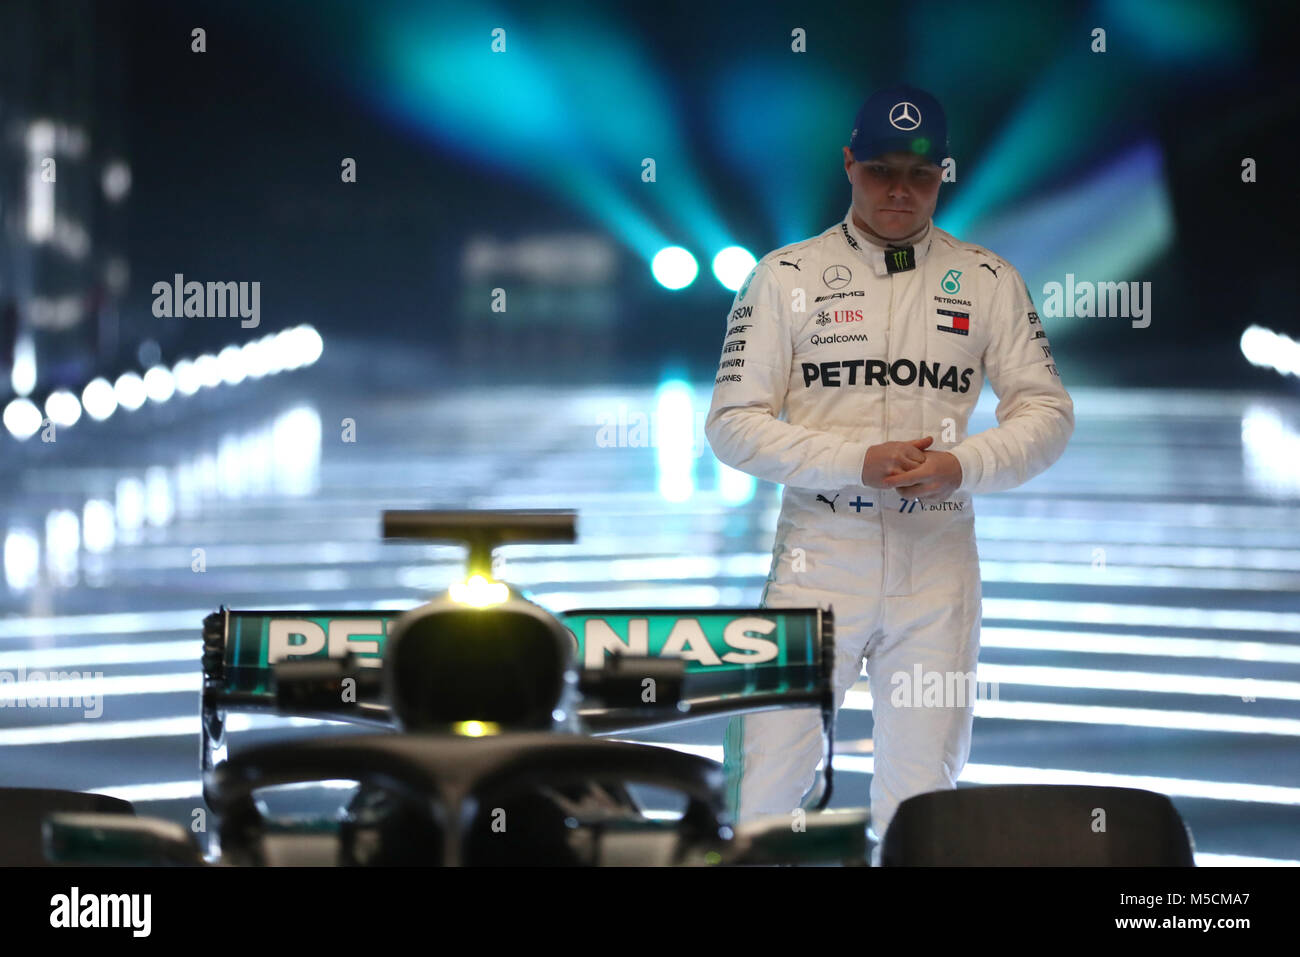 Valtteri Bottas with the new Mercedes W09 EQ Power+ during the Mercedes-AMG F1 2018 car launch at Silverstone, Towcester. Stock Photo